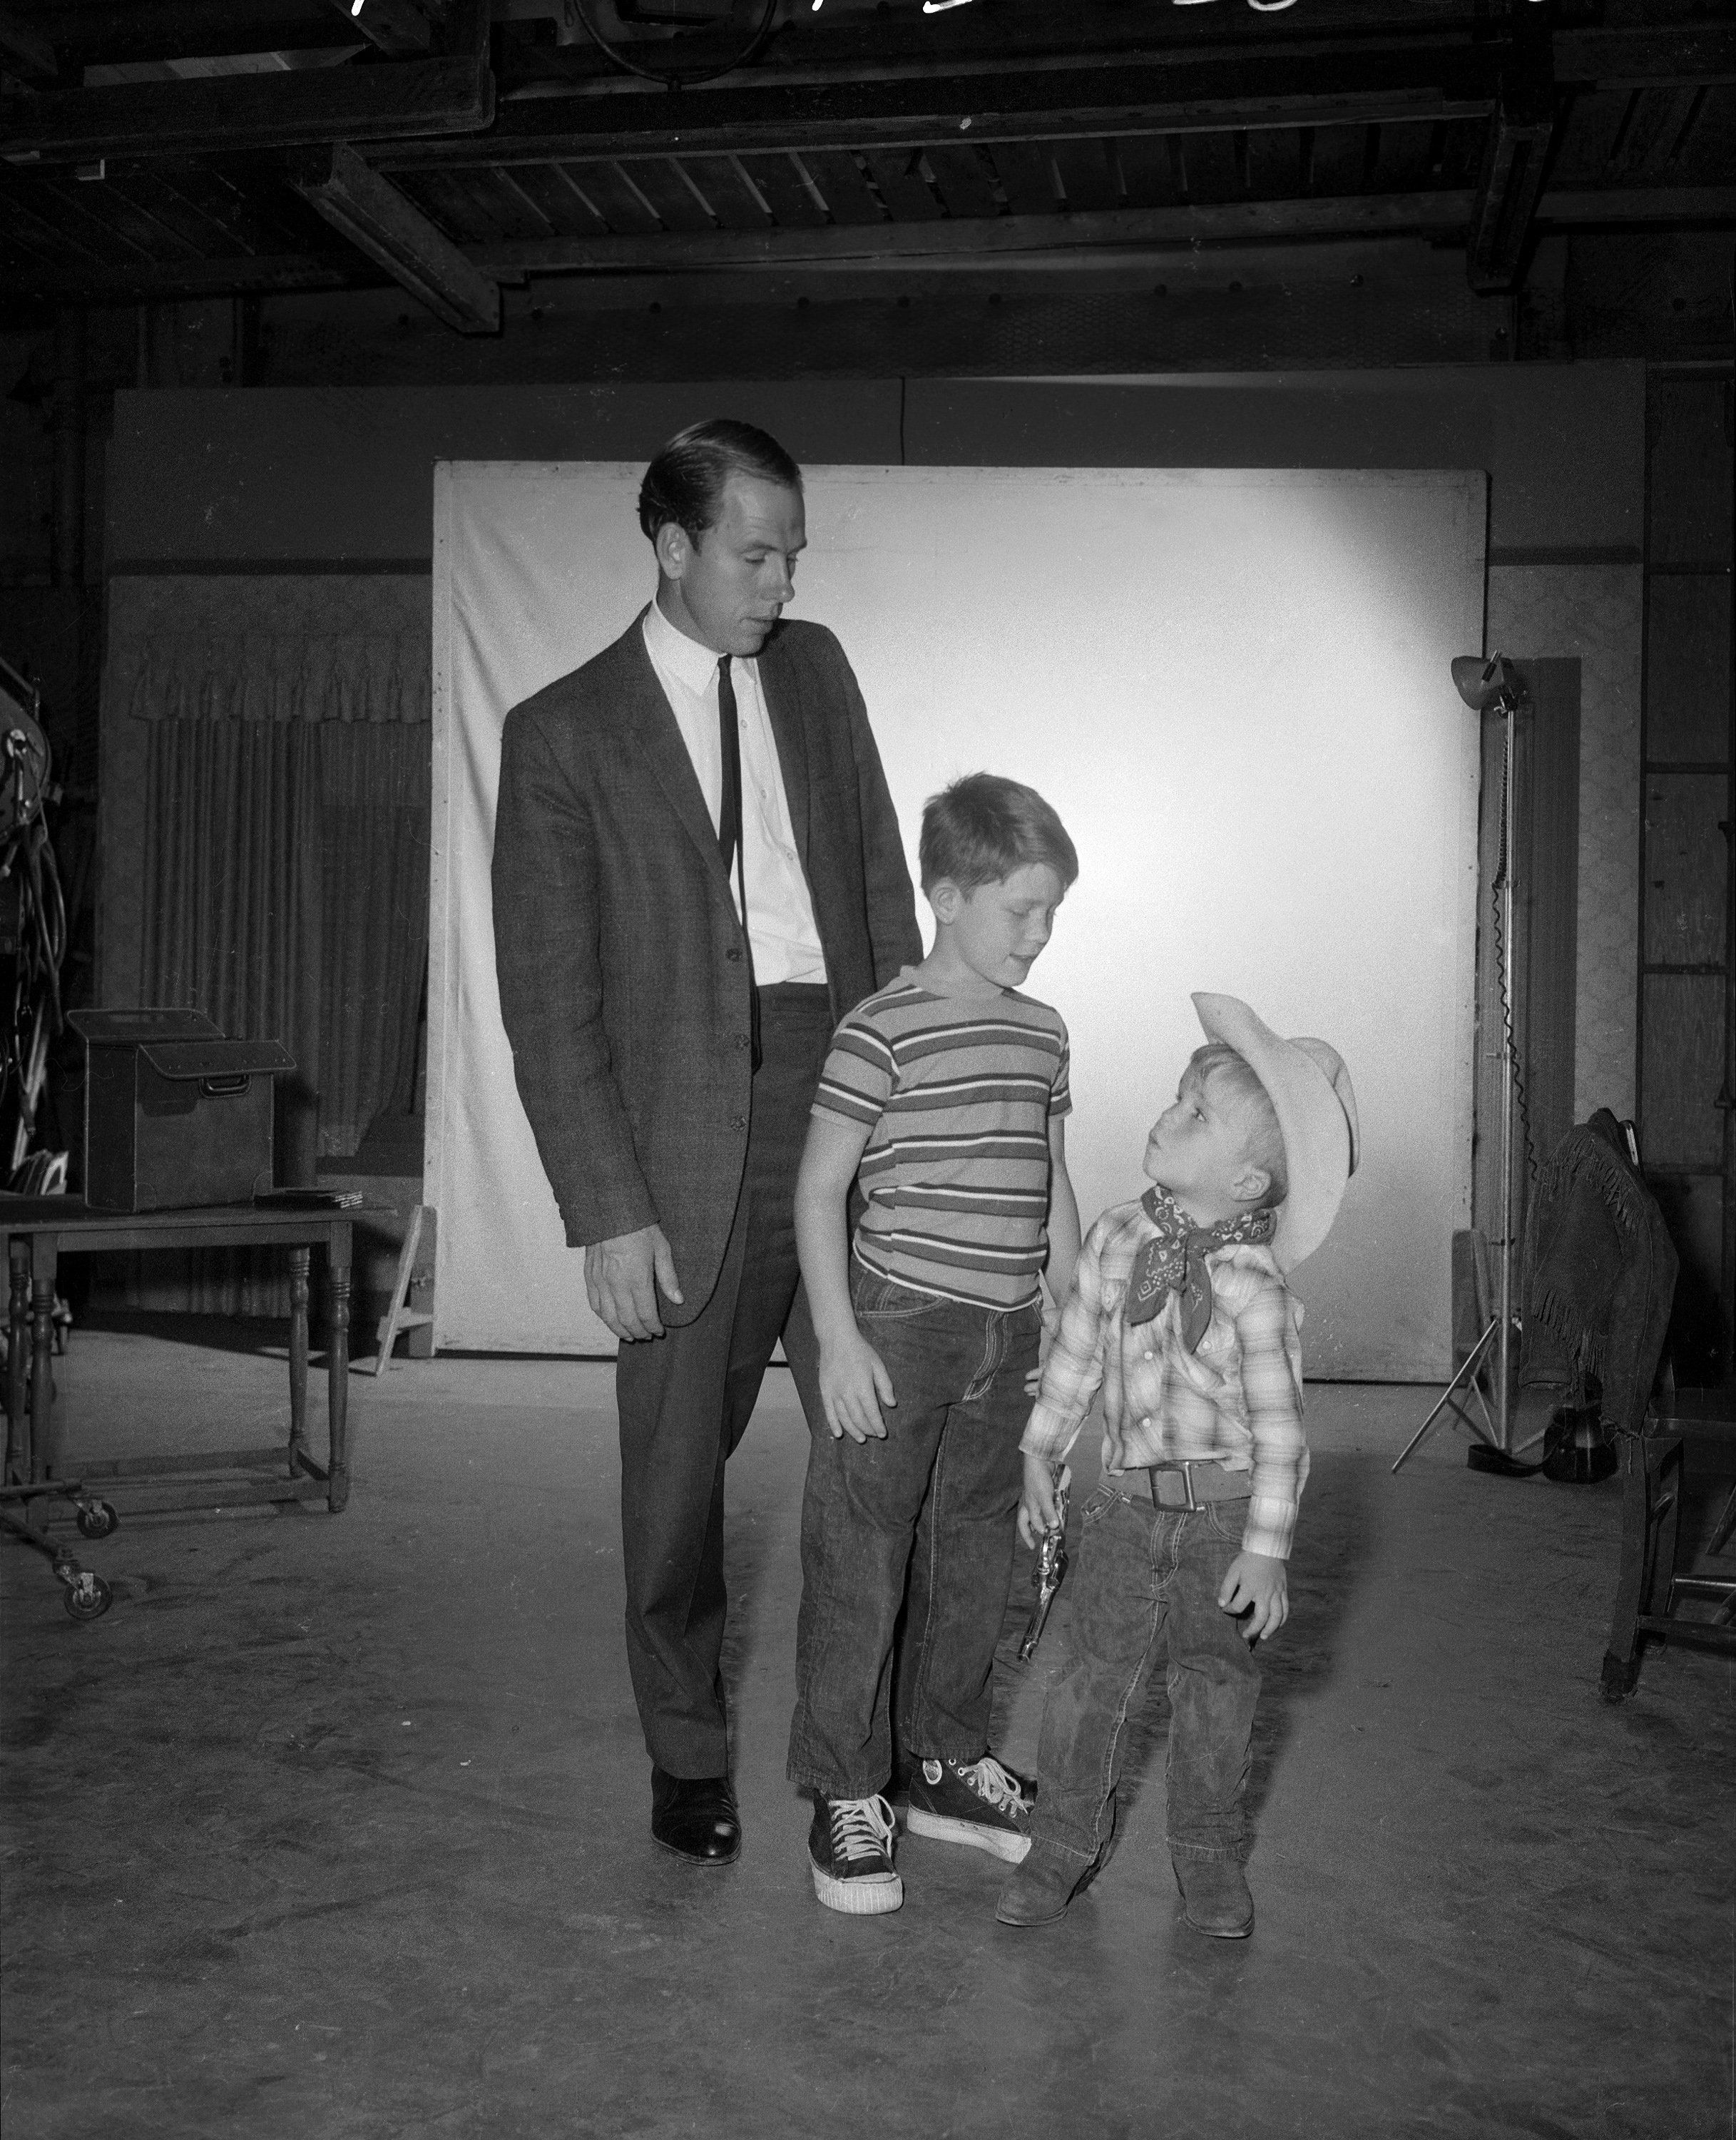 On 'The Andy Griffith Show' set: Rance Howard, Ron Howard, and Clint Howard pose glance towards one another in this posed photograph.